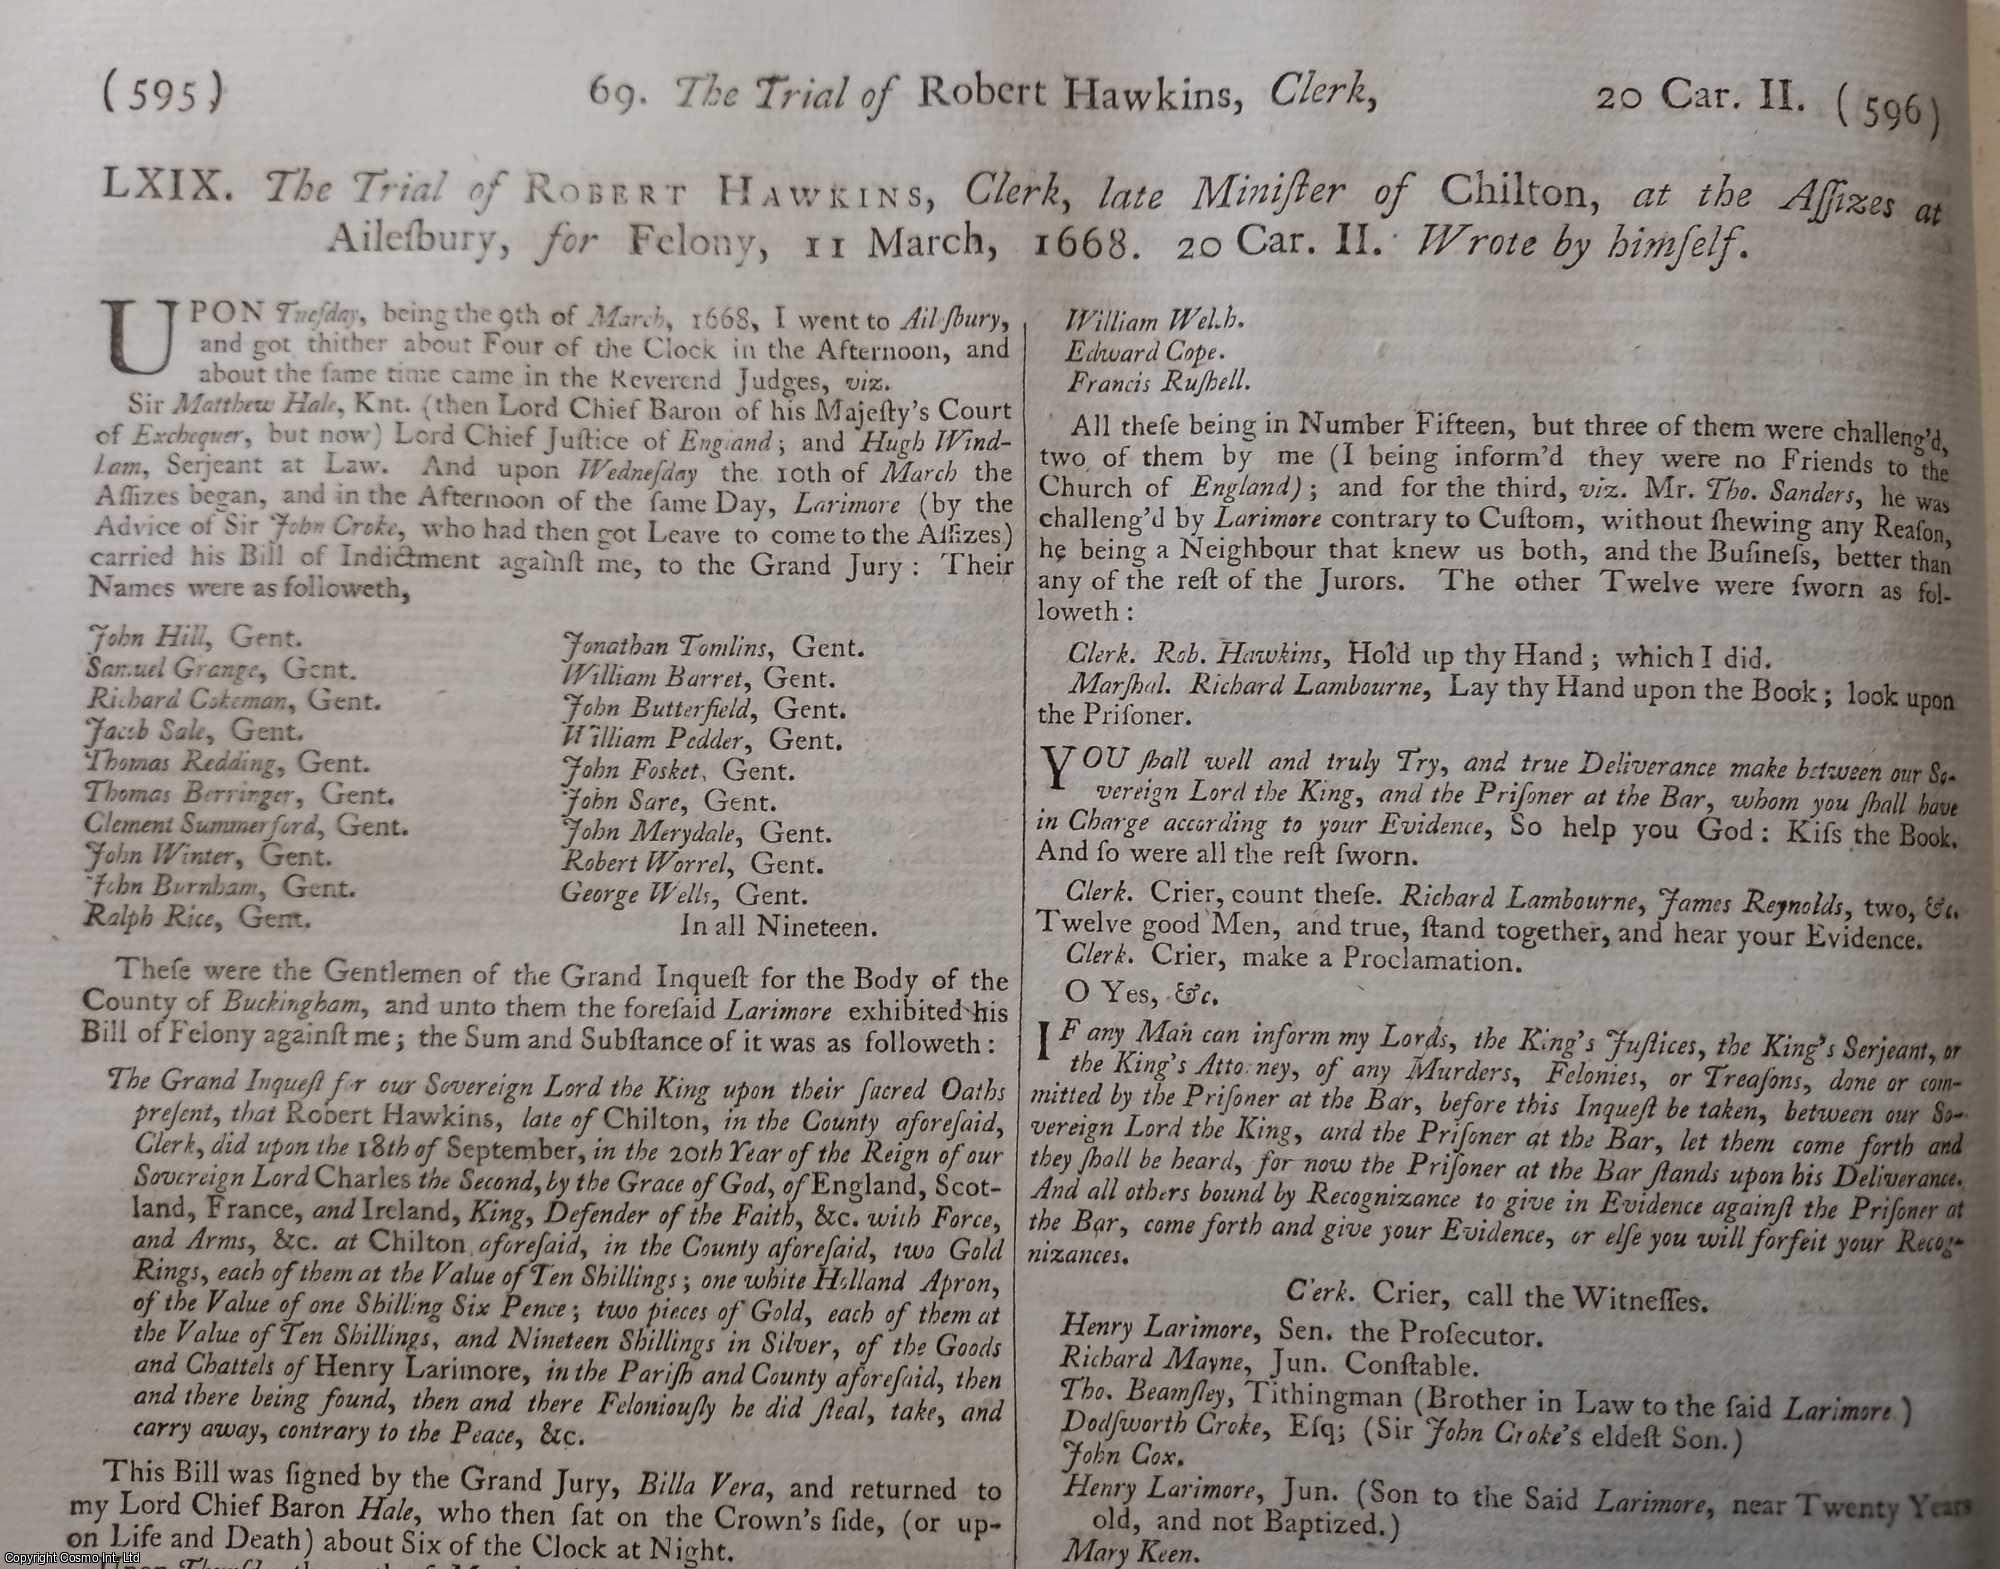 [Trial] - The Trial of Robert Hawkins, Clerk, Late Minister of Chilton, at The Assizes at Aylesbury, For Felony, 1668. An original article from the Collected State Trials.